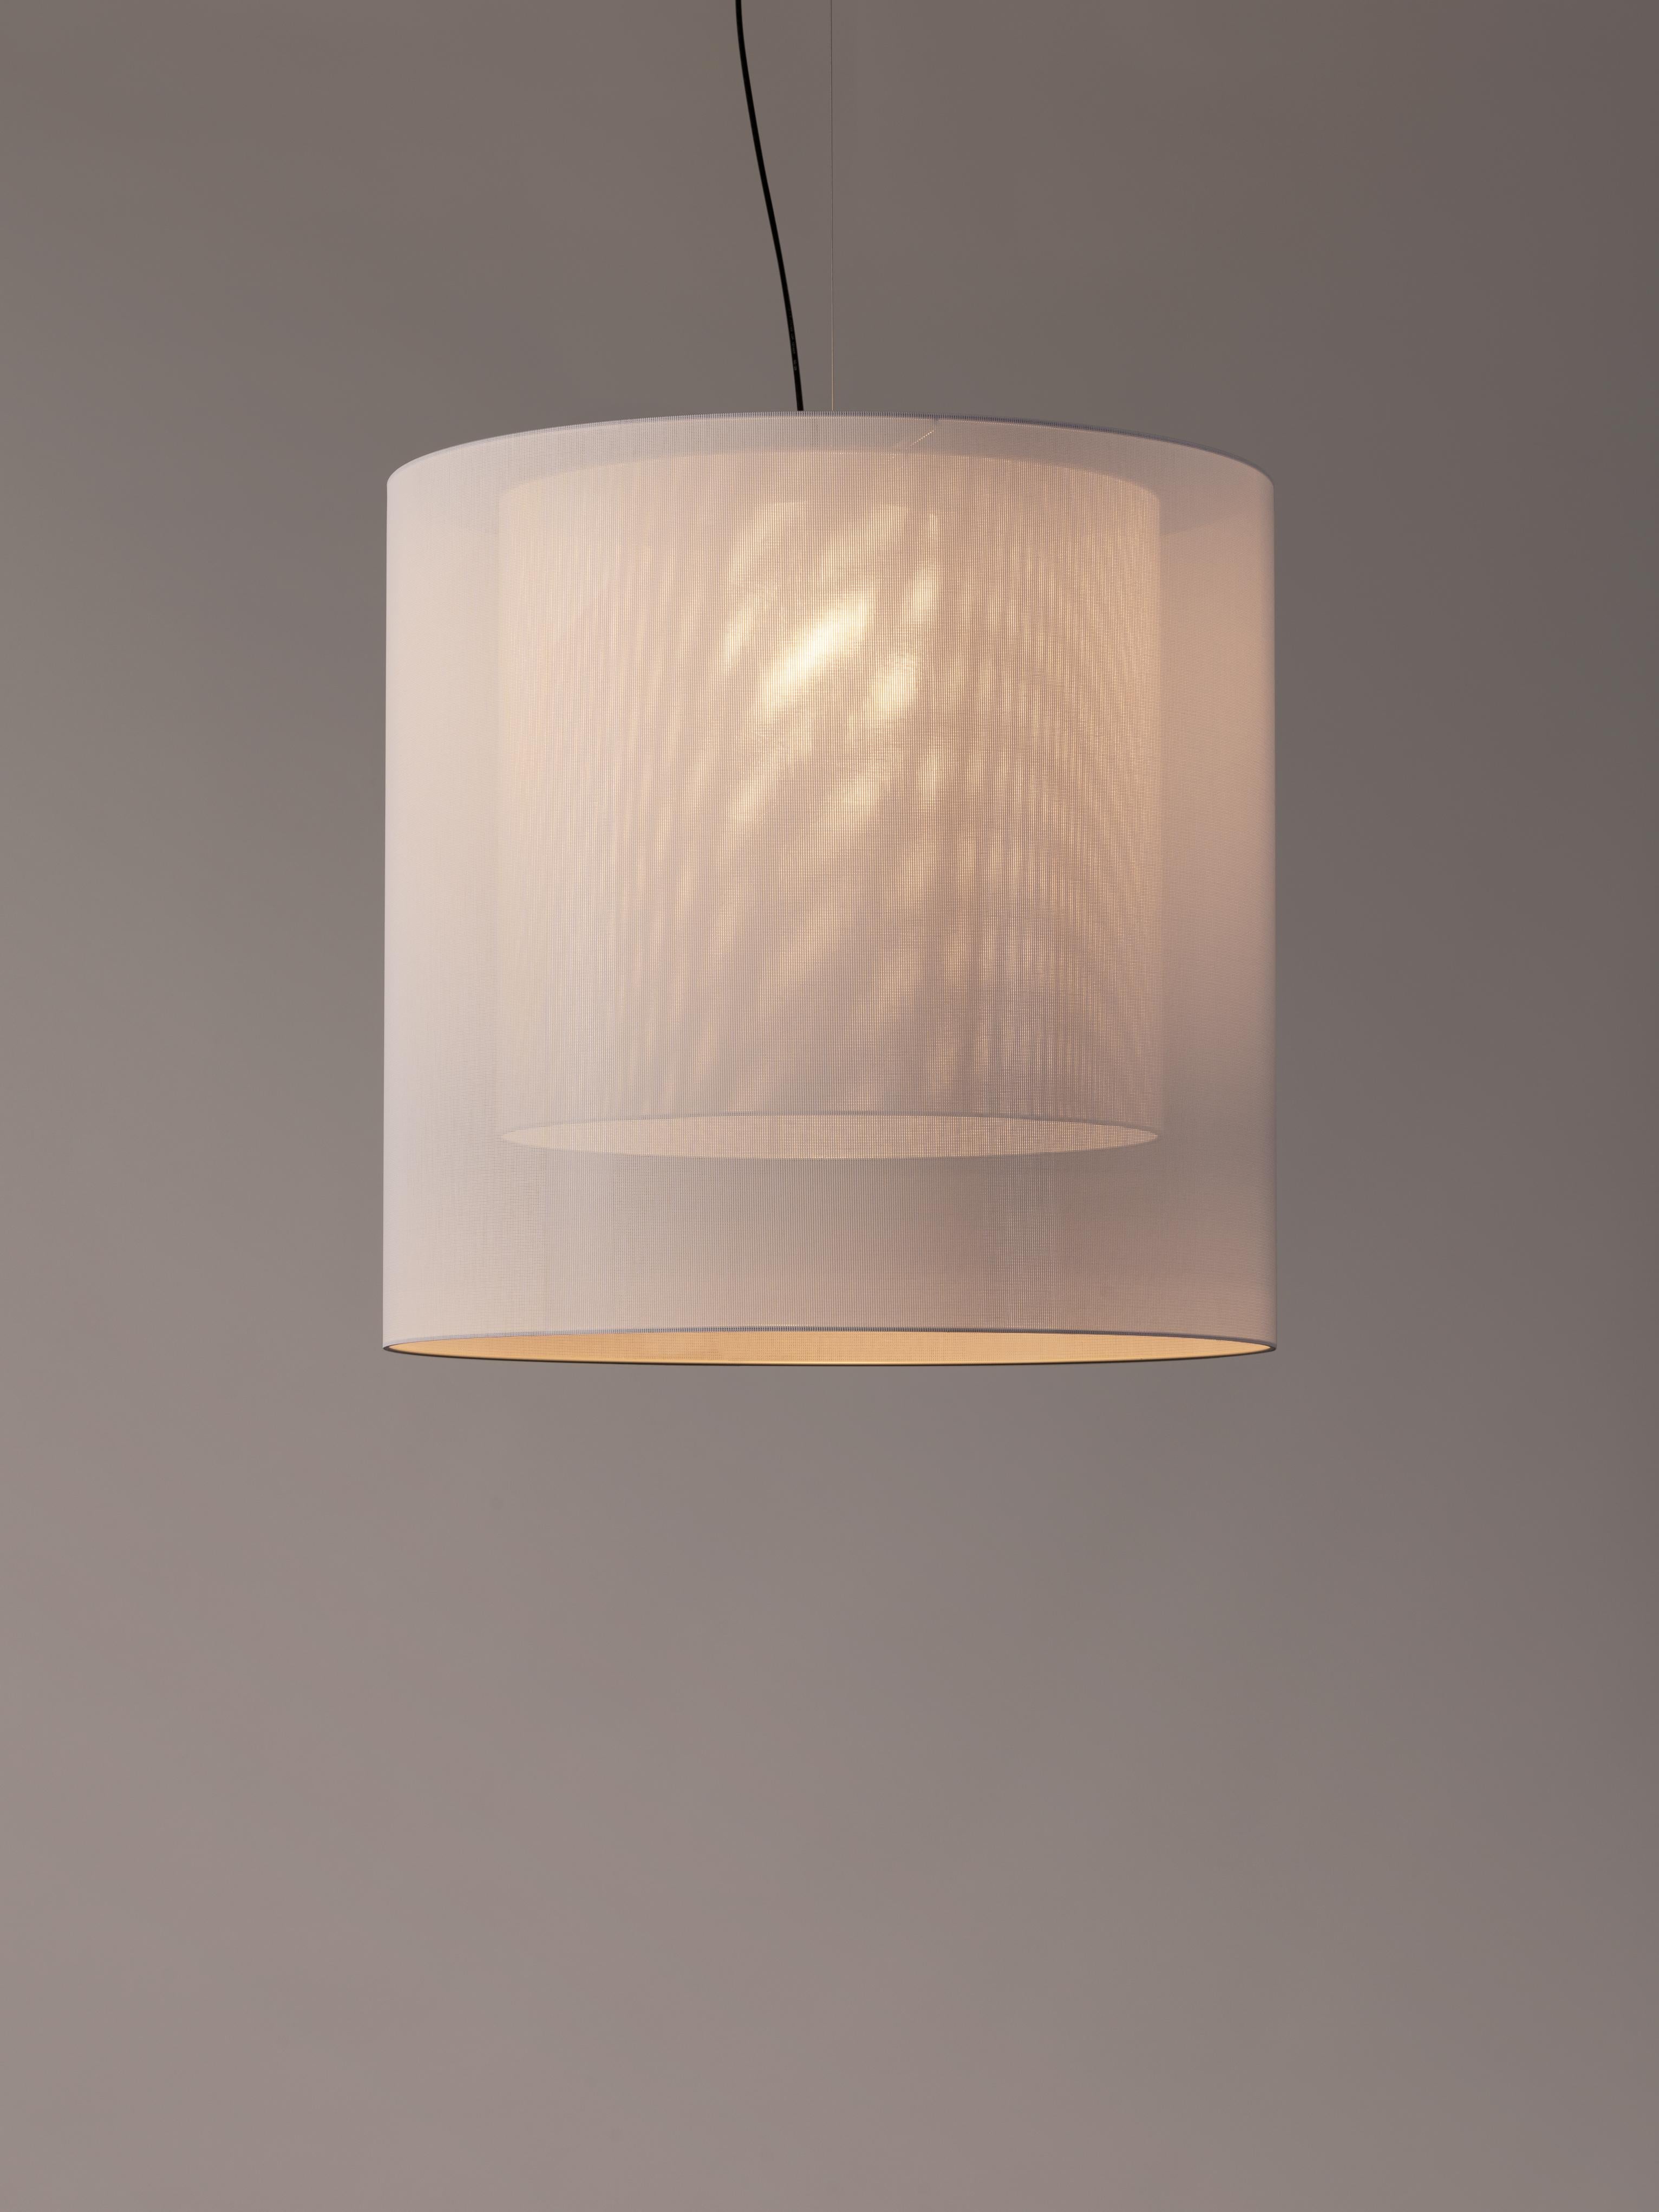 Whitemoaré xl pendant lamp by Antoni Arola
Dimensions: D 83 x H 81 cm
Materials: Metal, polyester.
Available in other colors and sizes.

Moaré’s multiple combinations of formats and colours make it highly versatile. The series takes its name